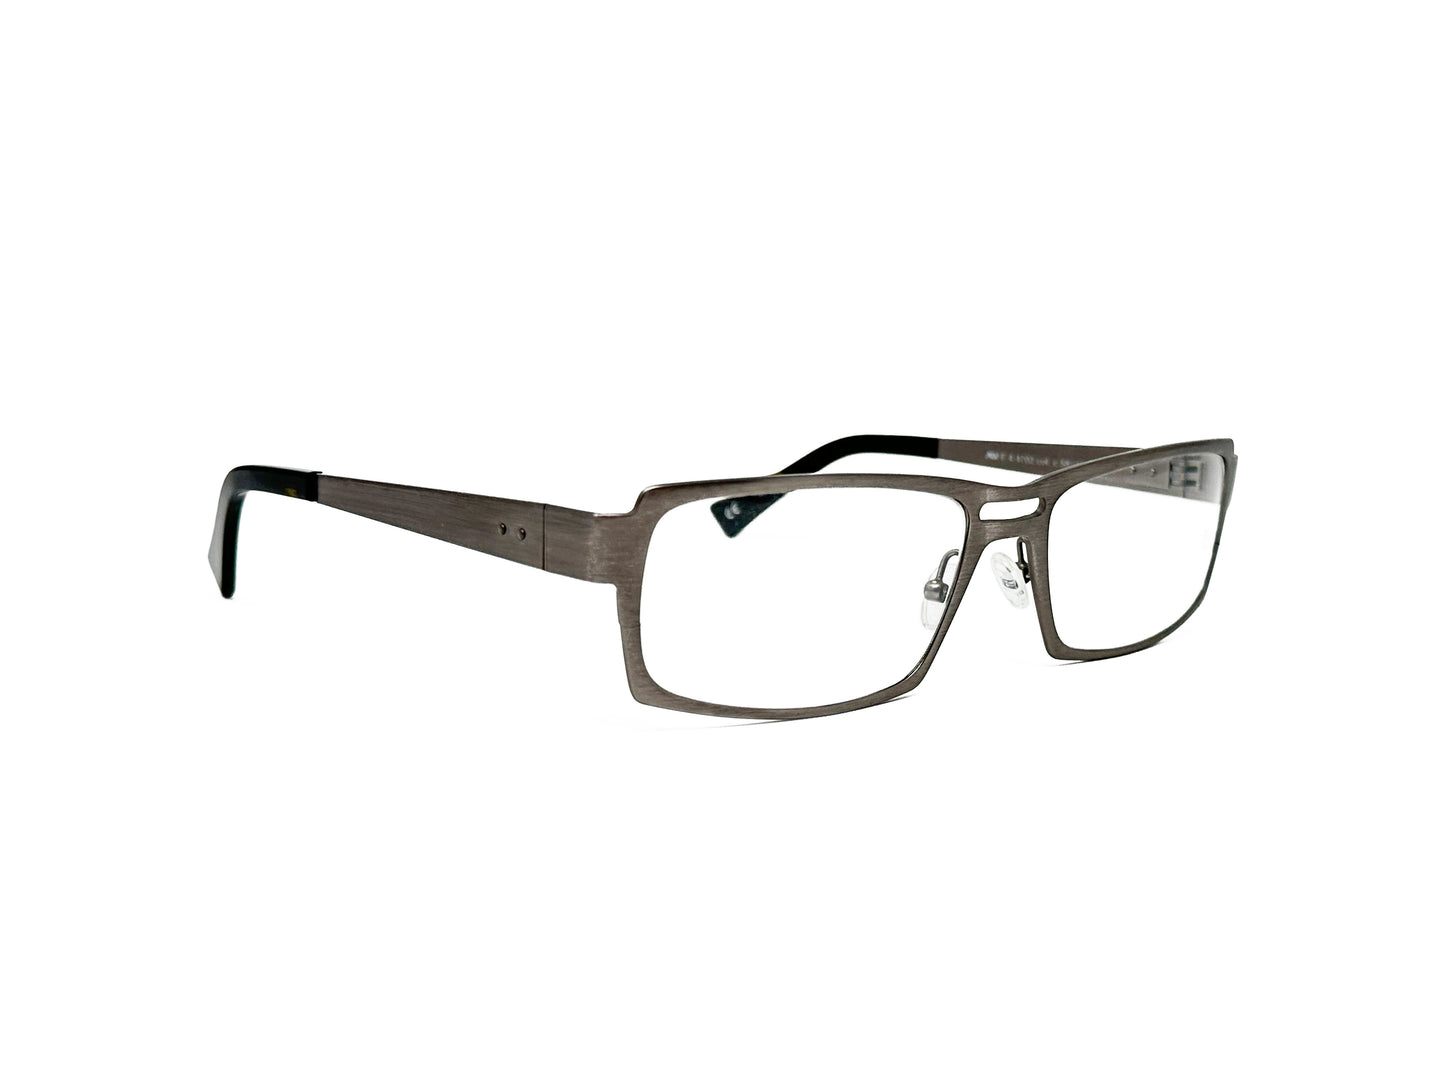 Andy Wolfe rectangular metal optical frame with rounded-rectangular cut out above bridge. Model: 4702. Color: C - Dark silver. Side view.